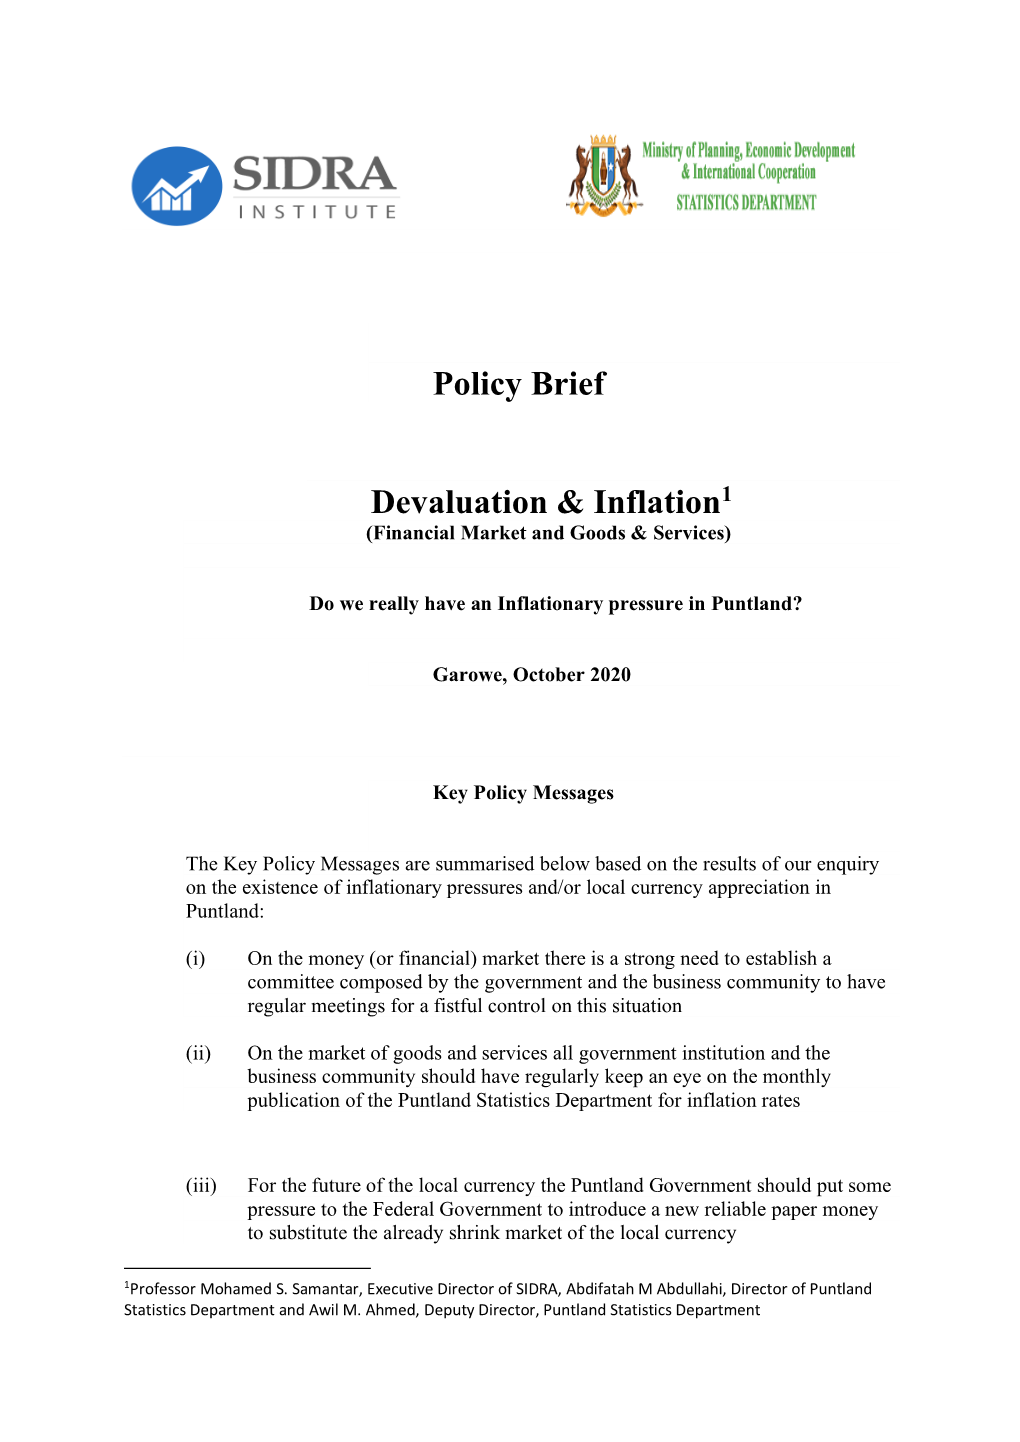 Policy Brief Devaluation & Inflation1